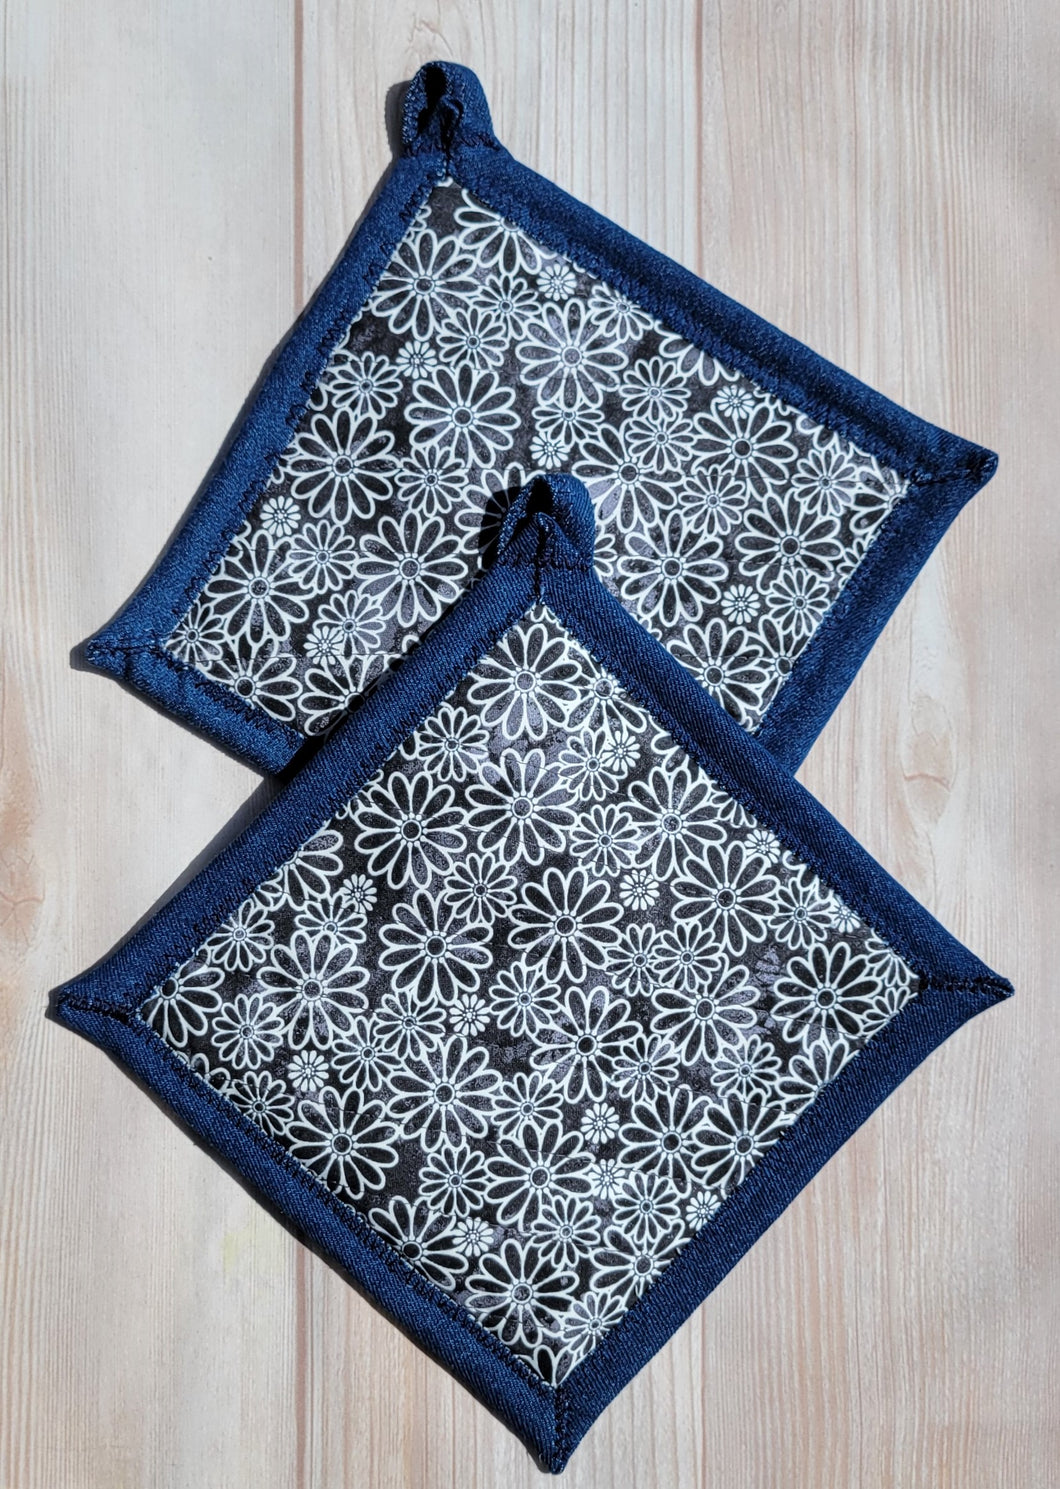 Pot Holders - Black and White Daisies